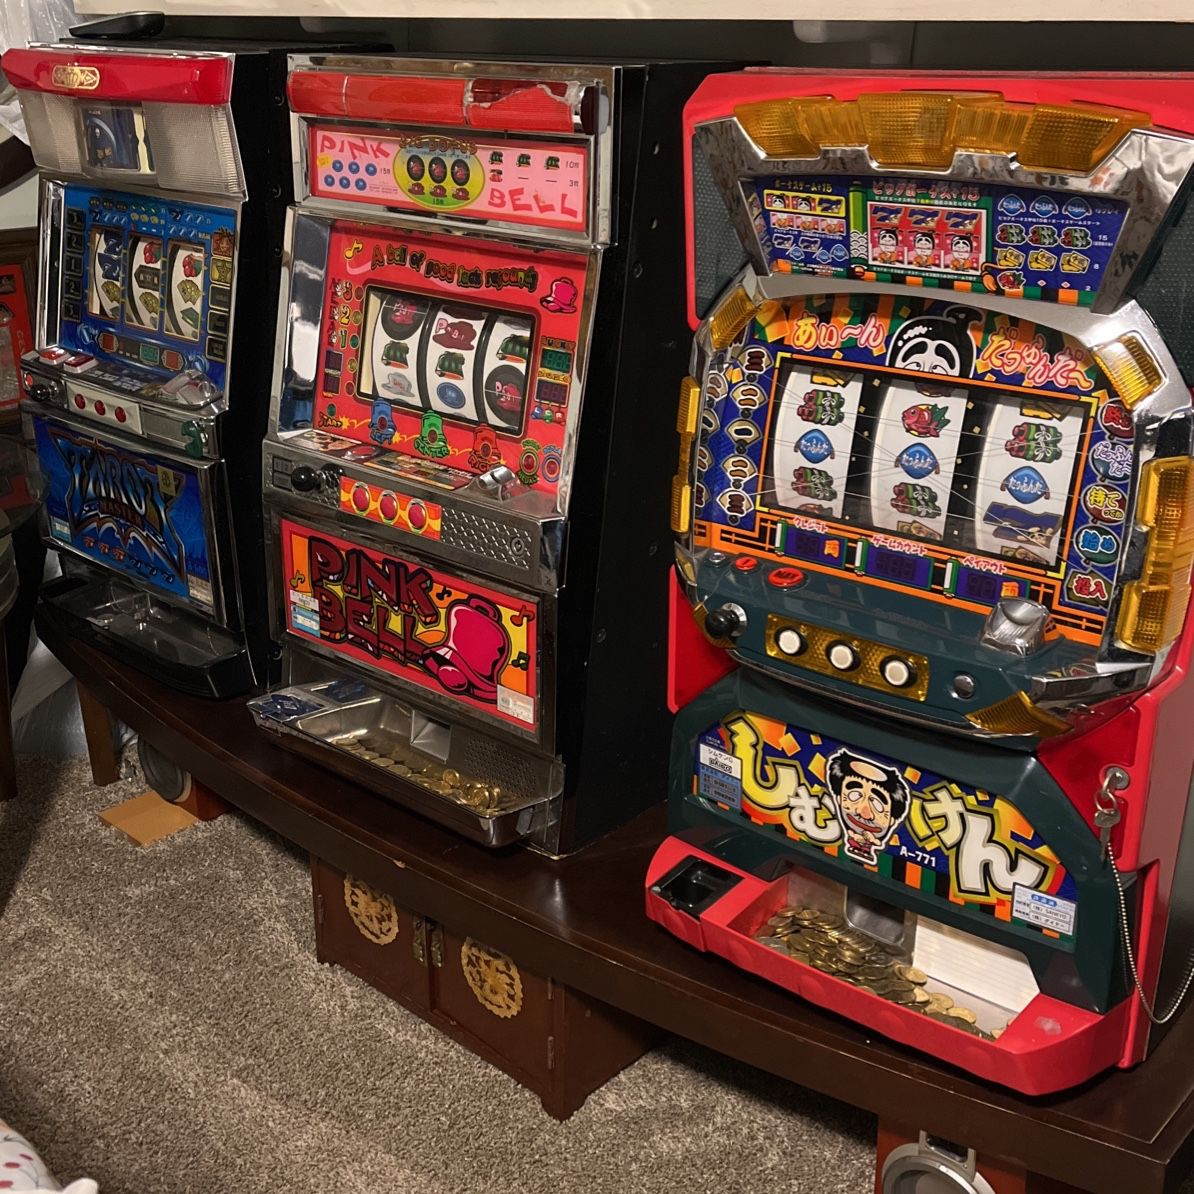 Slot Machines 450.00 For The Three